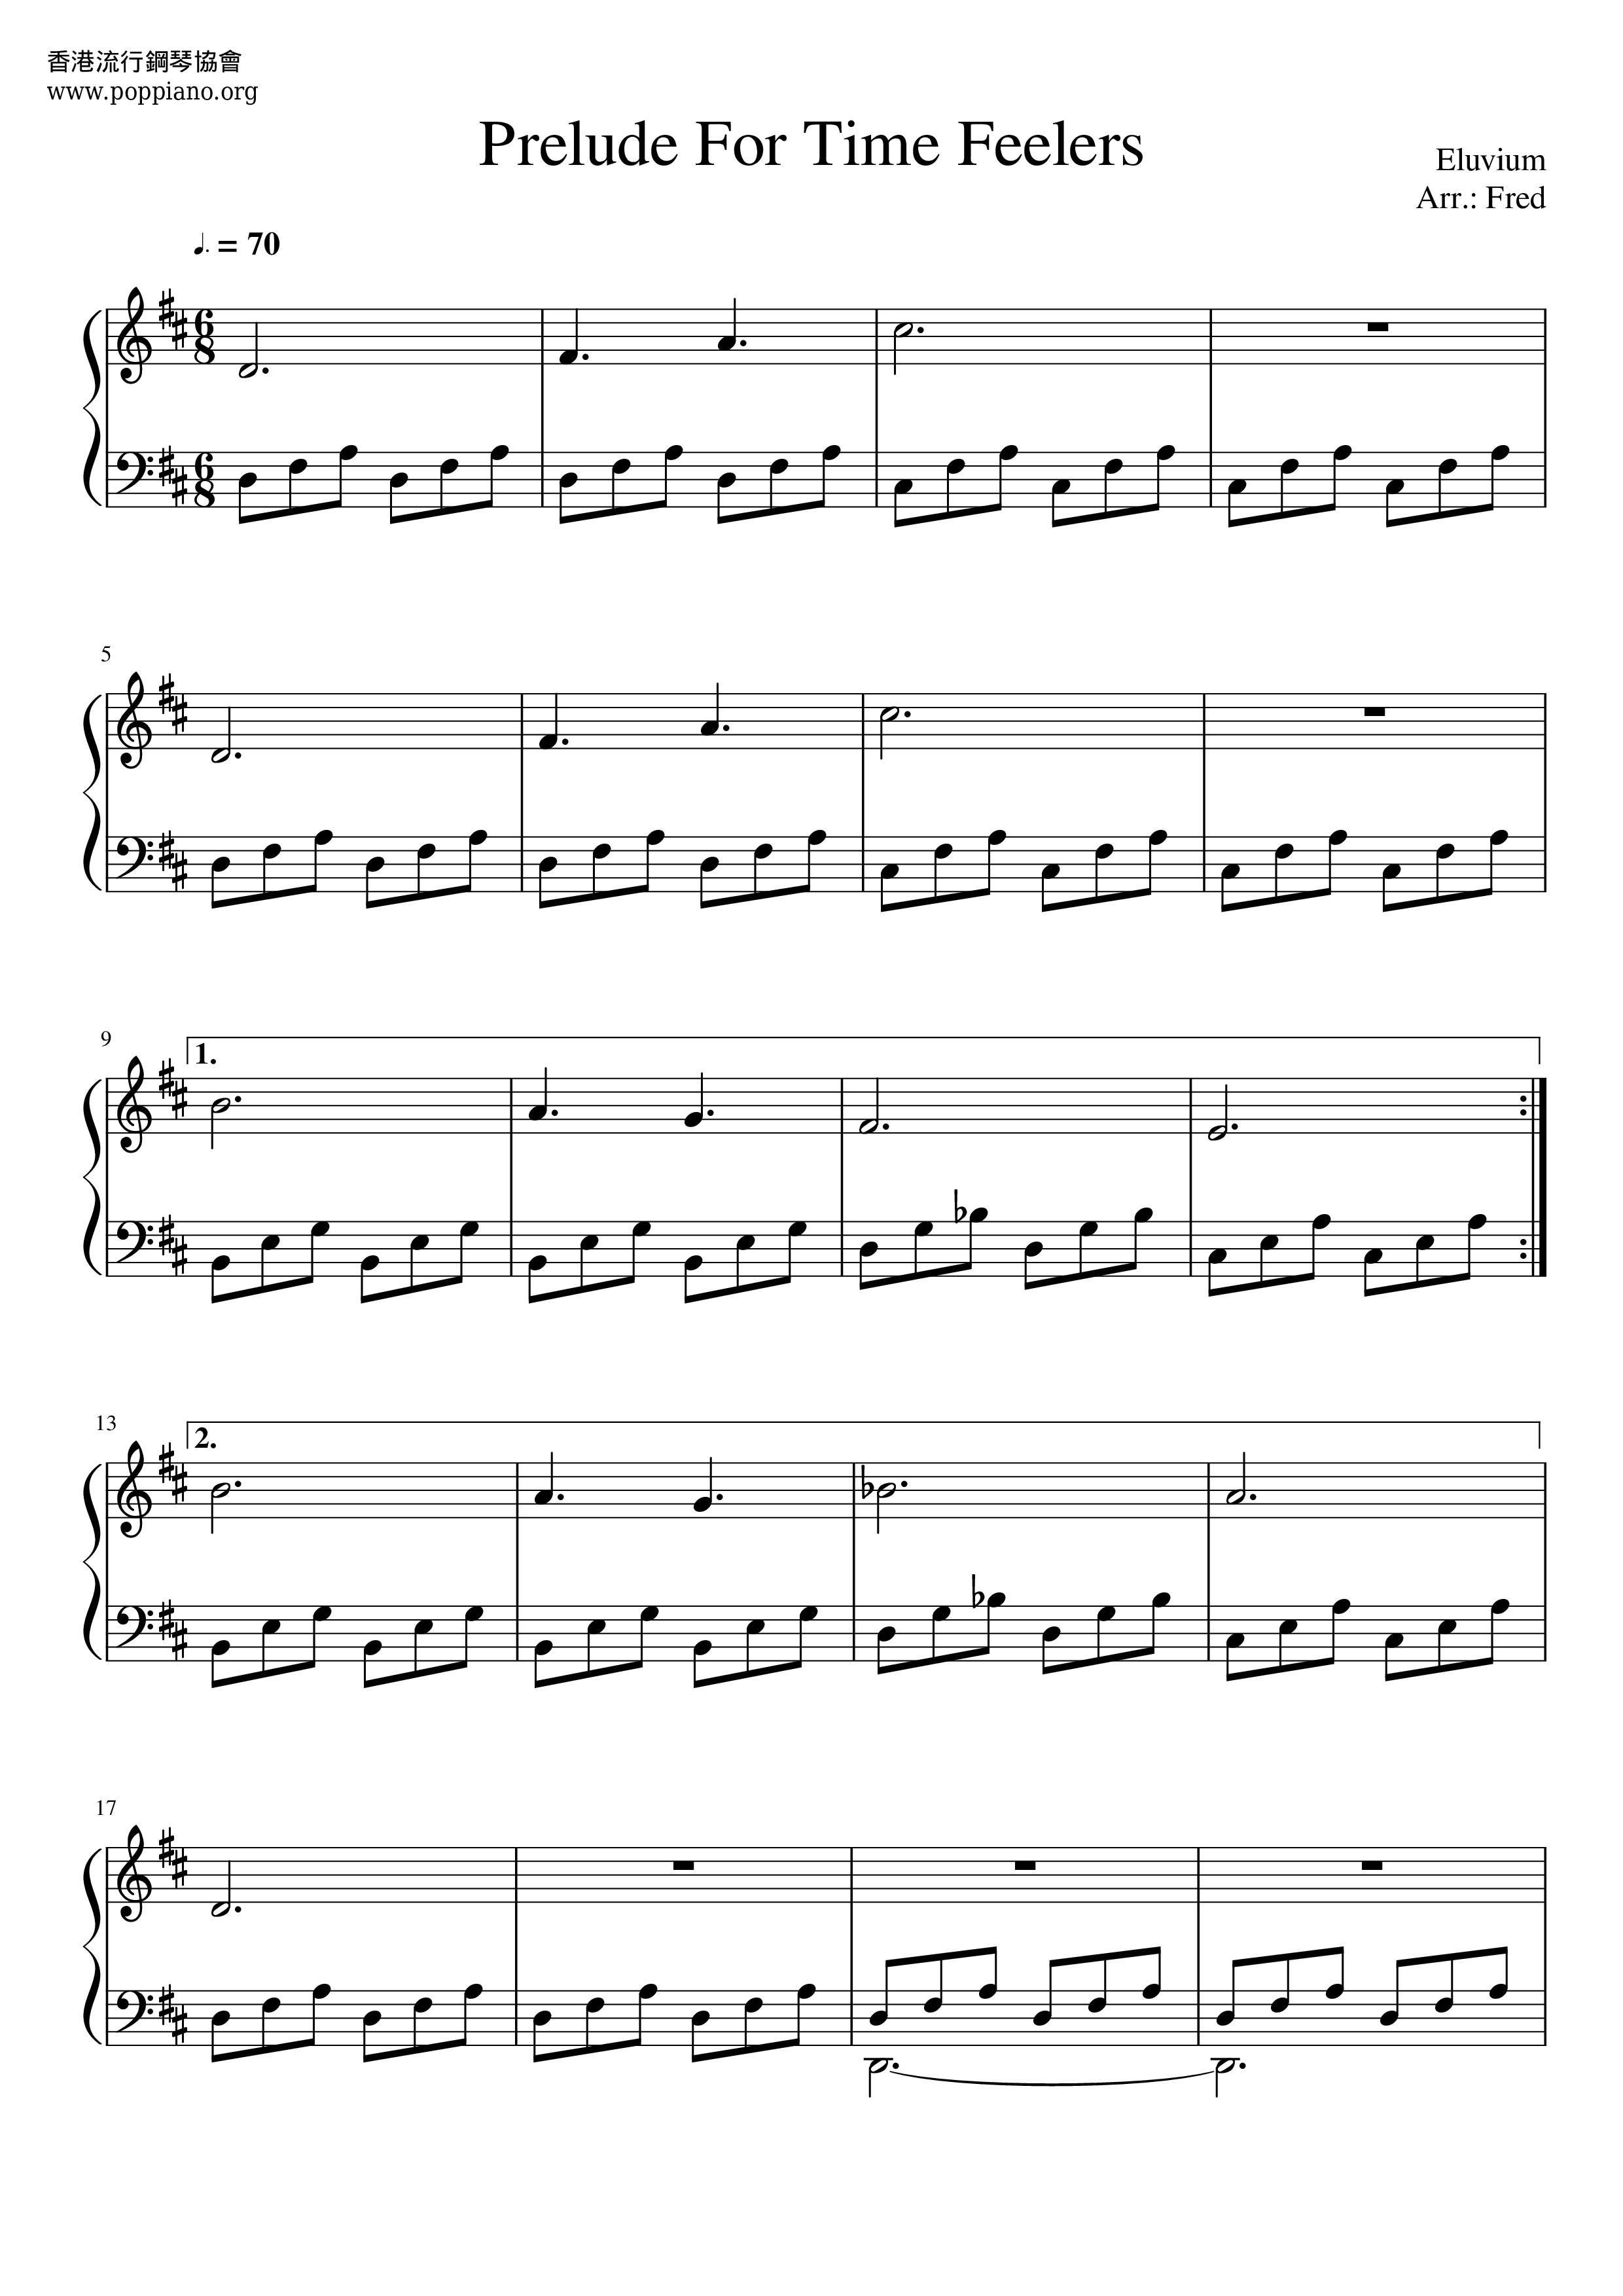 Prelude For Time Feelers Score